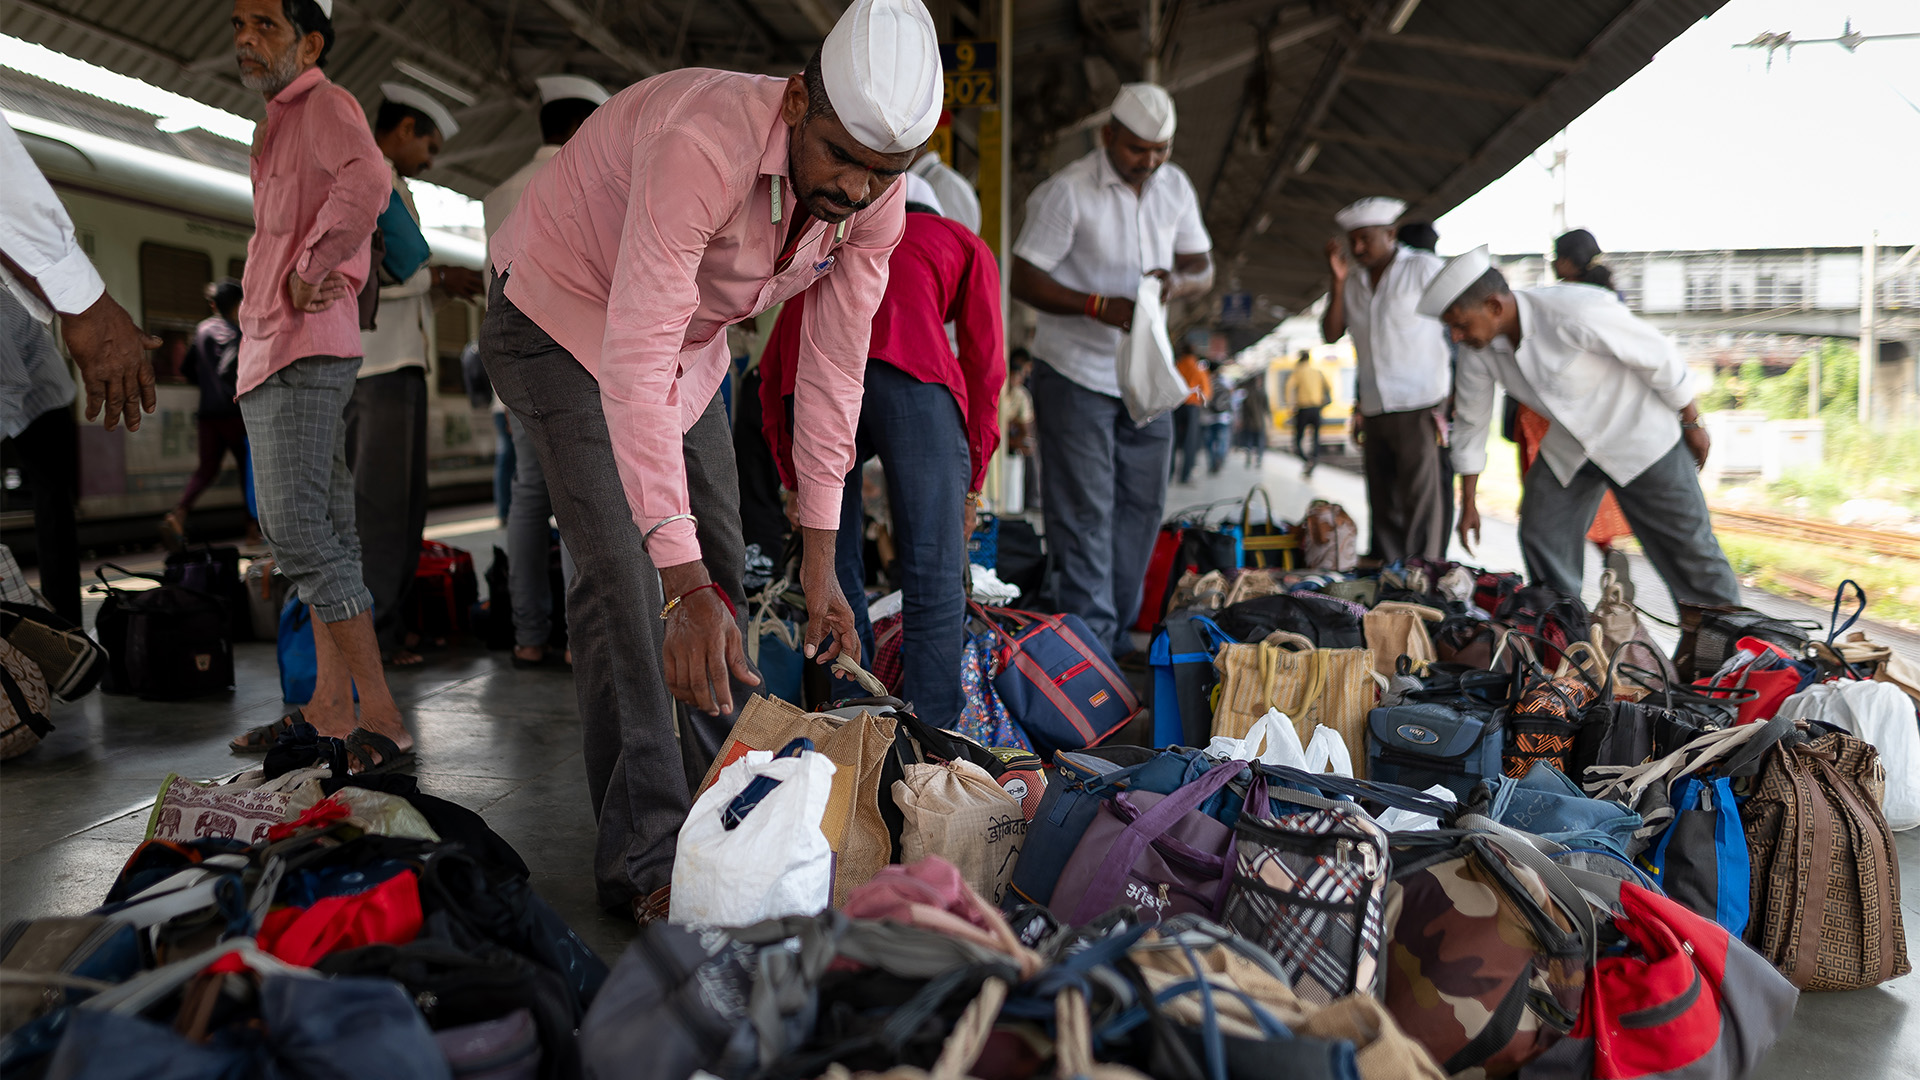 Photo of Dabbawalas sorting lunch bags on station platform